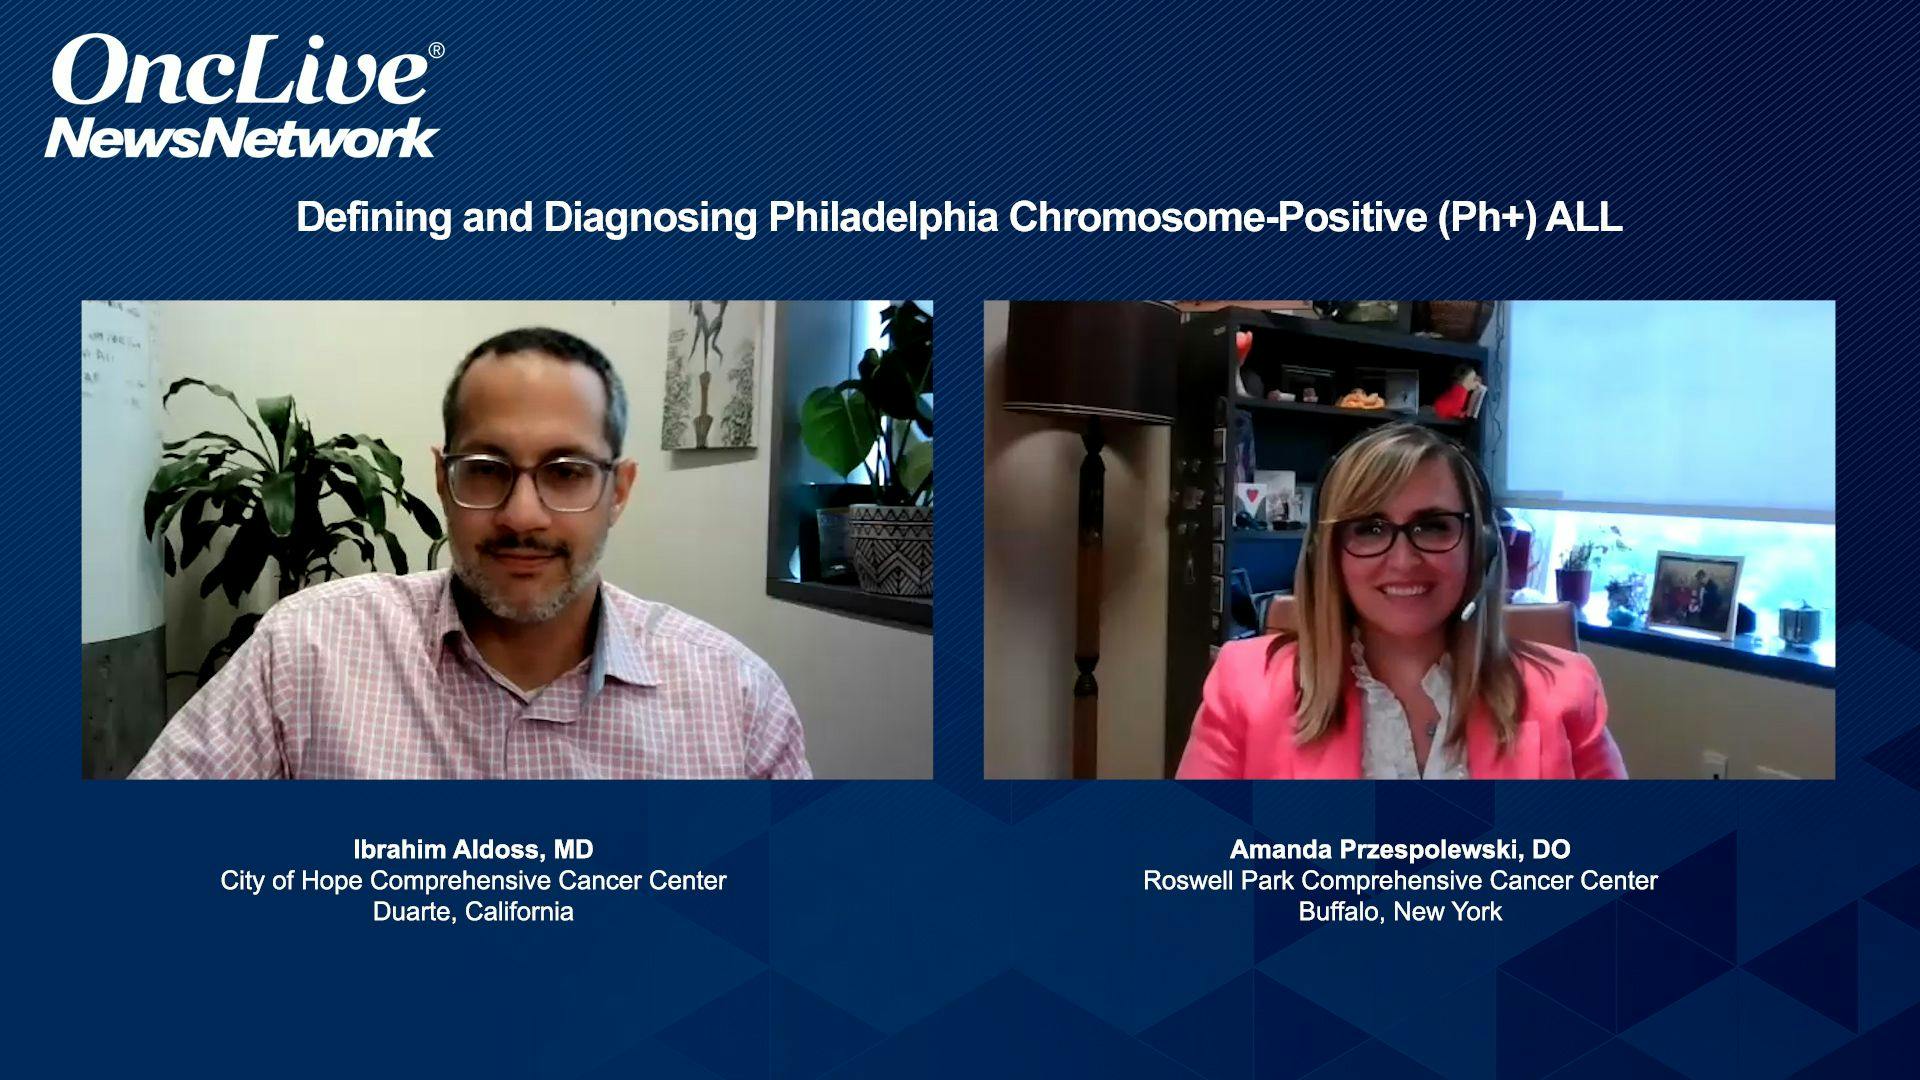 Post-Conference Perspectives: Advances in the Management of Newly Diagnosed Ph+ Acute Lymphoblastic Leukemia